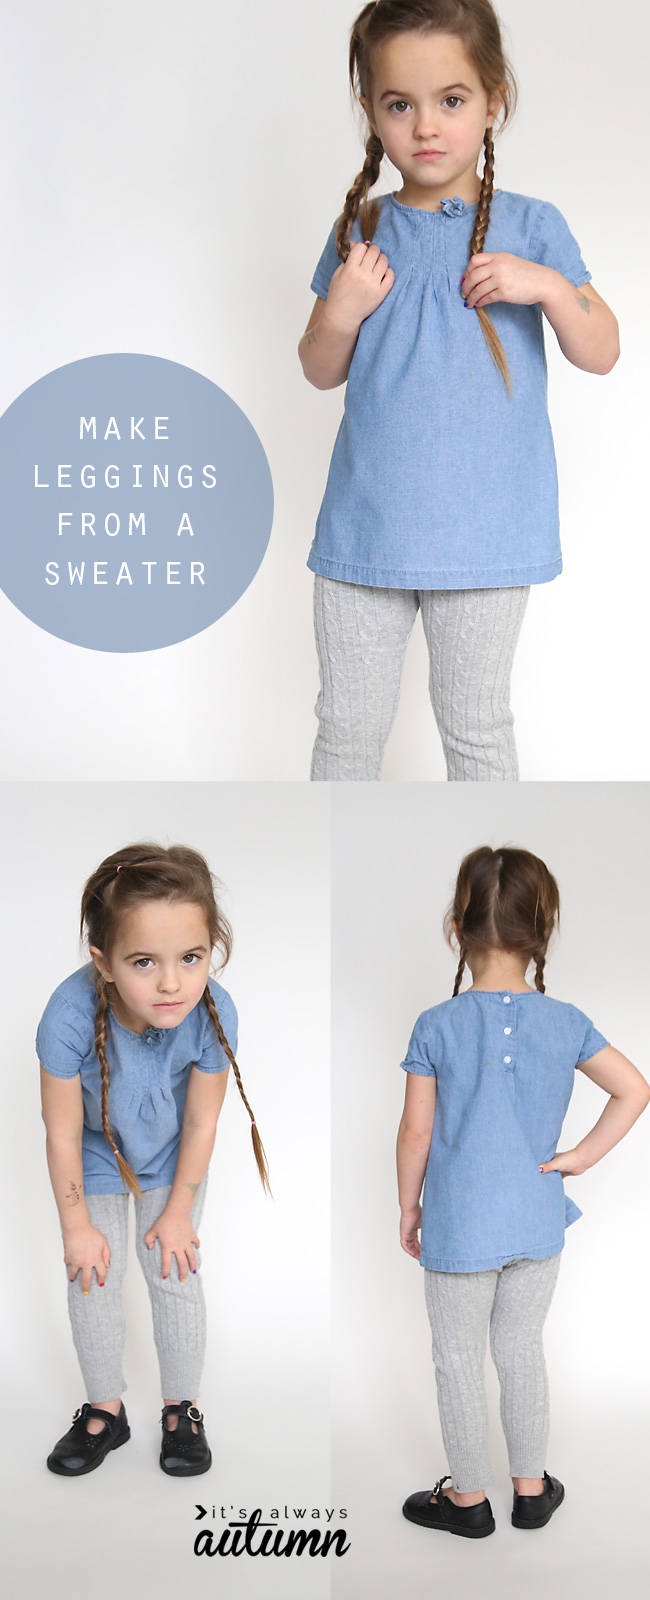 A little girl wearing grey leggings made from a sweater